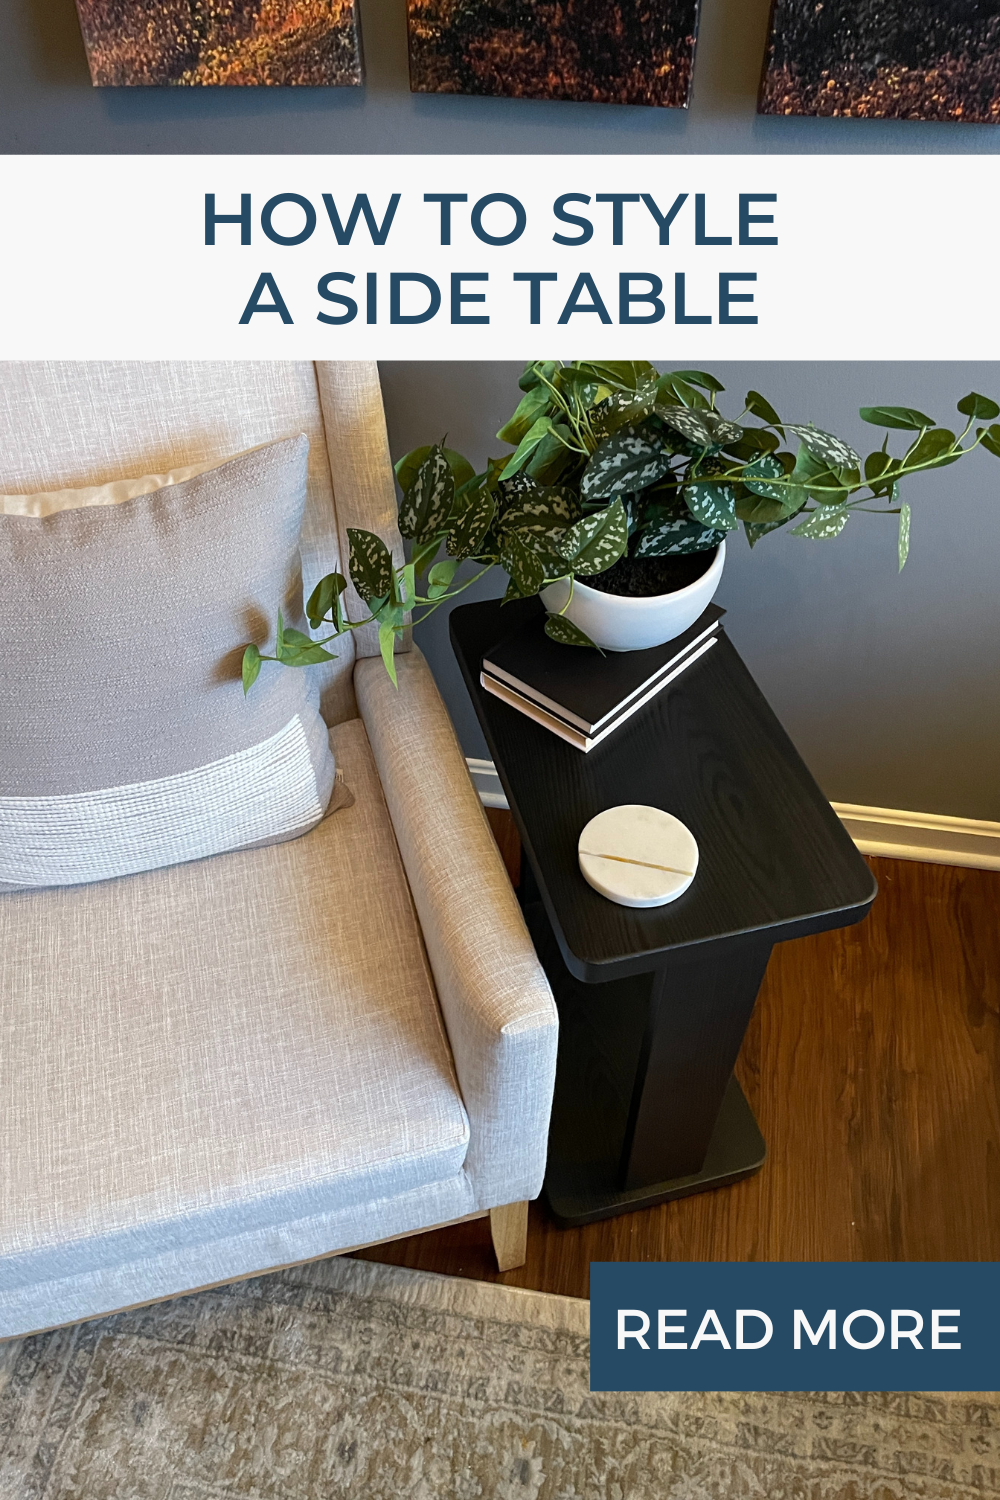 How to style a side table